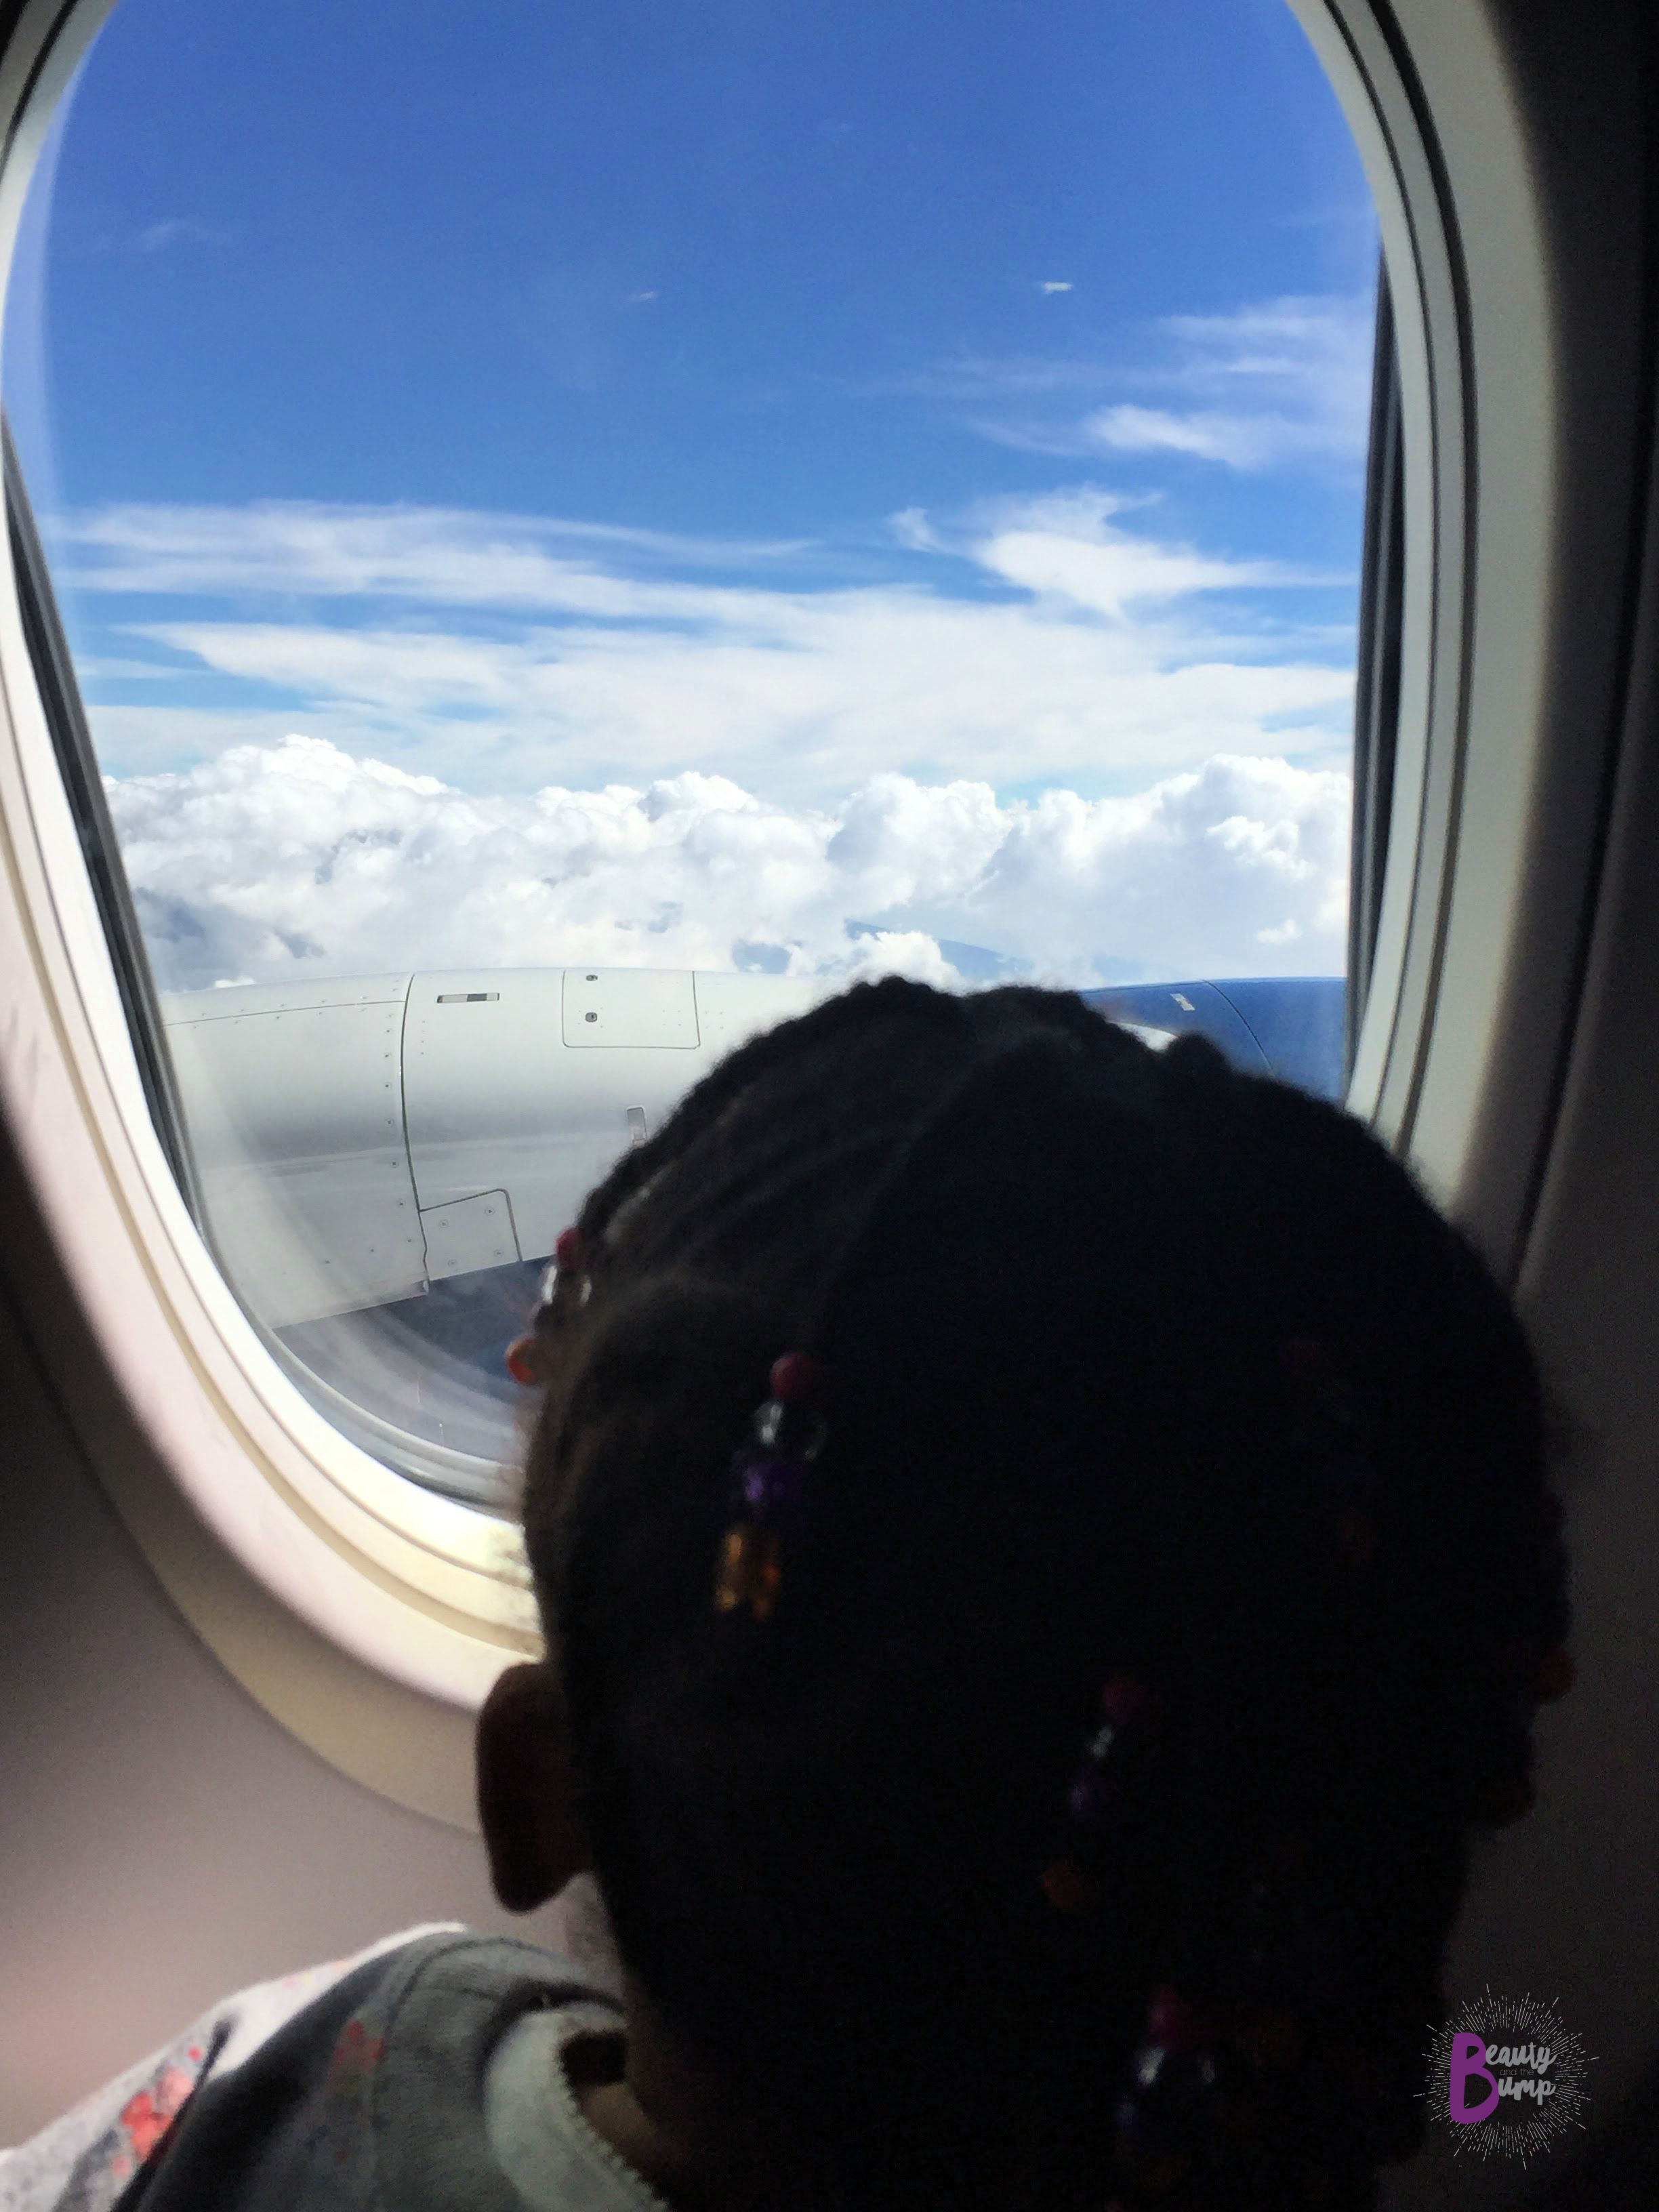 TRaveling with kids Get the kid a window seat so that they are able to see the take-off and landing, as well as the clouds.